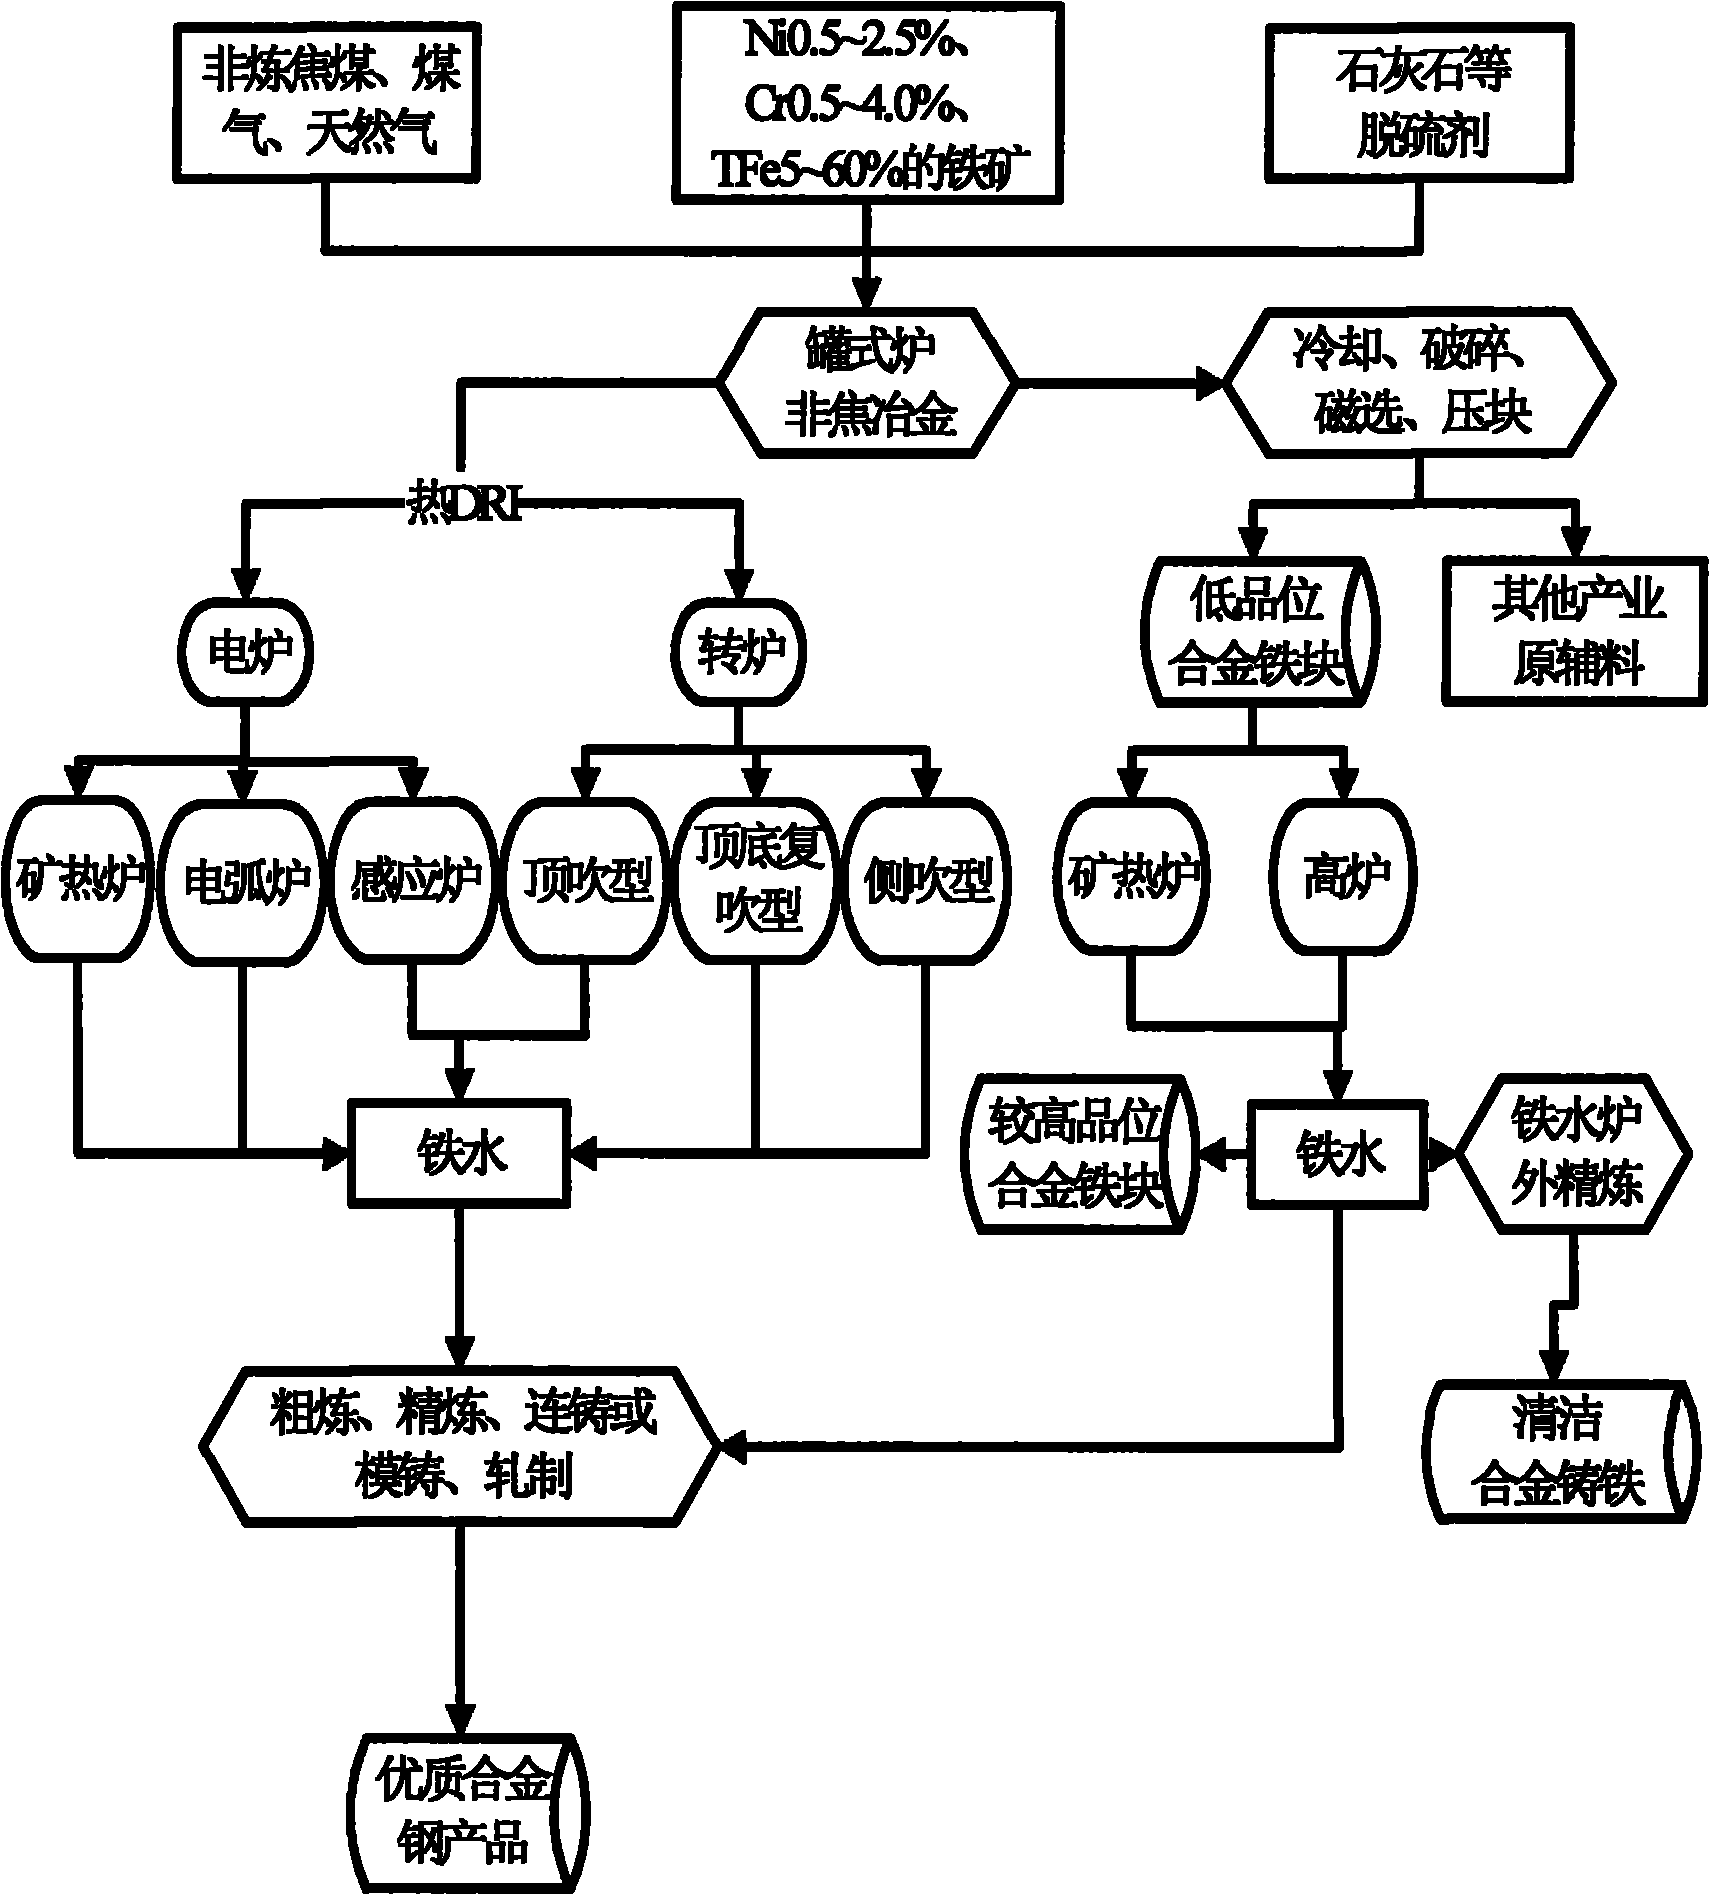 Method for producing alloy steel by directly utilizing low-grade nickel-chromium commensal iron ore